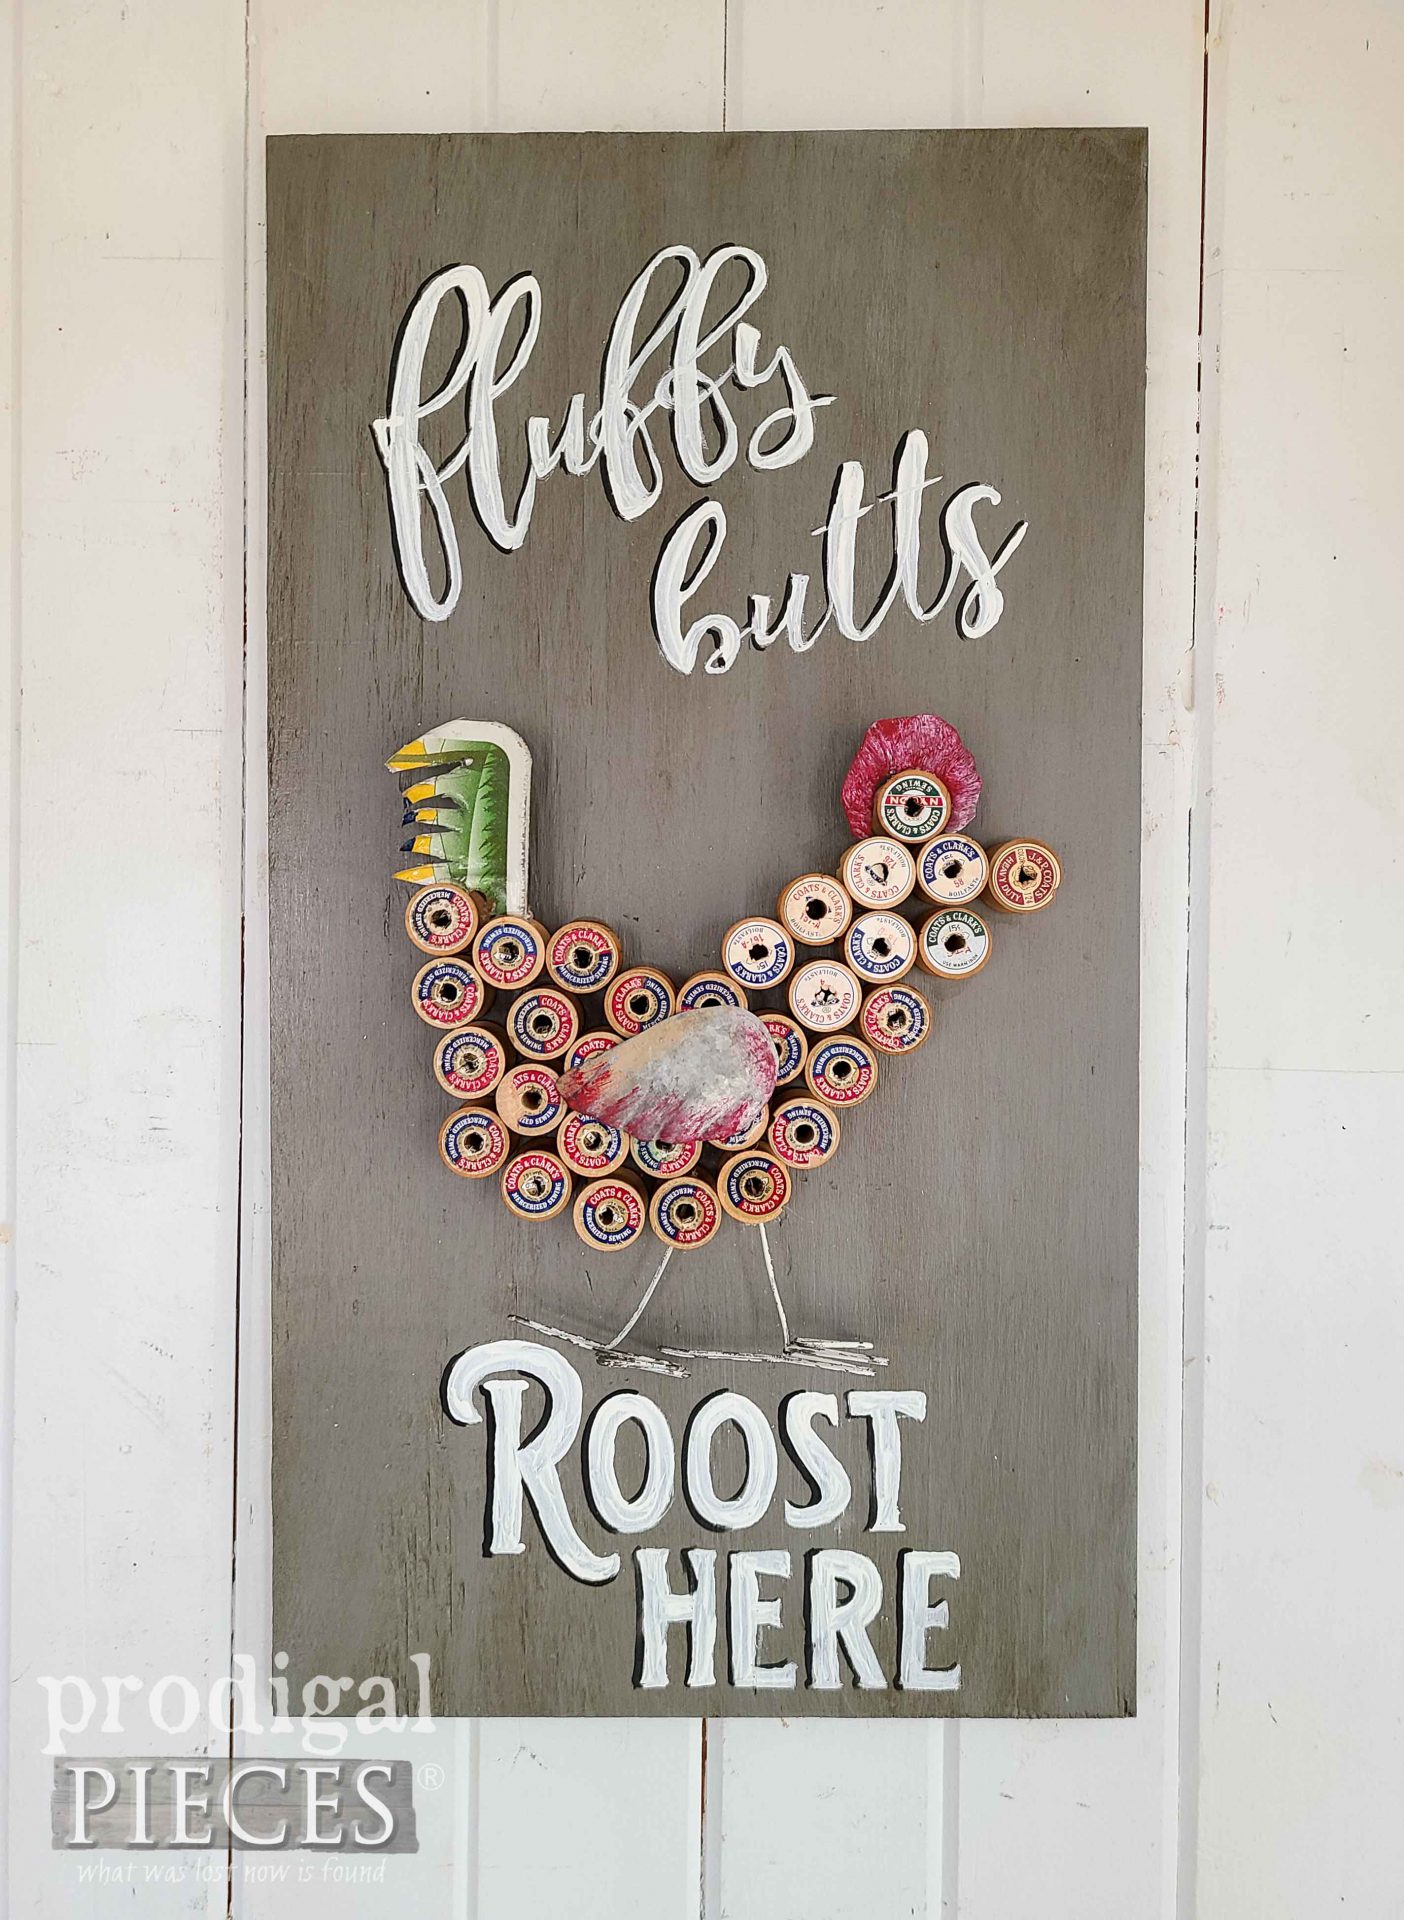 Fluffy Butts Roost Here Upcycled Wooden Thread Spool Sign by Larissa of Prodigal Pieces | prodigalpieces.com #prodigalpieces #chicken #diy #home #farmhouse